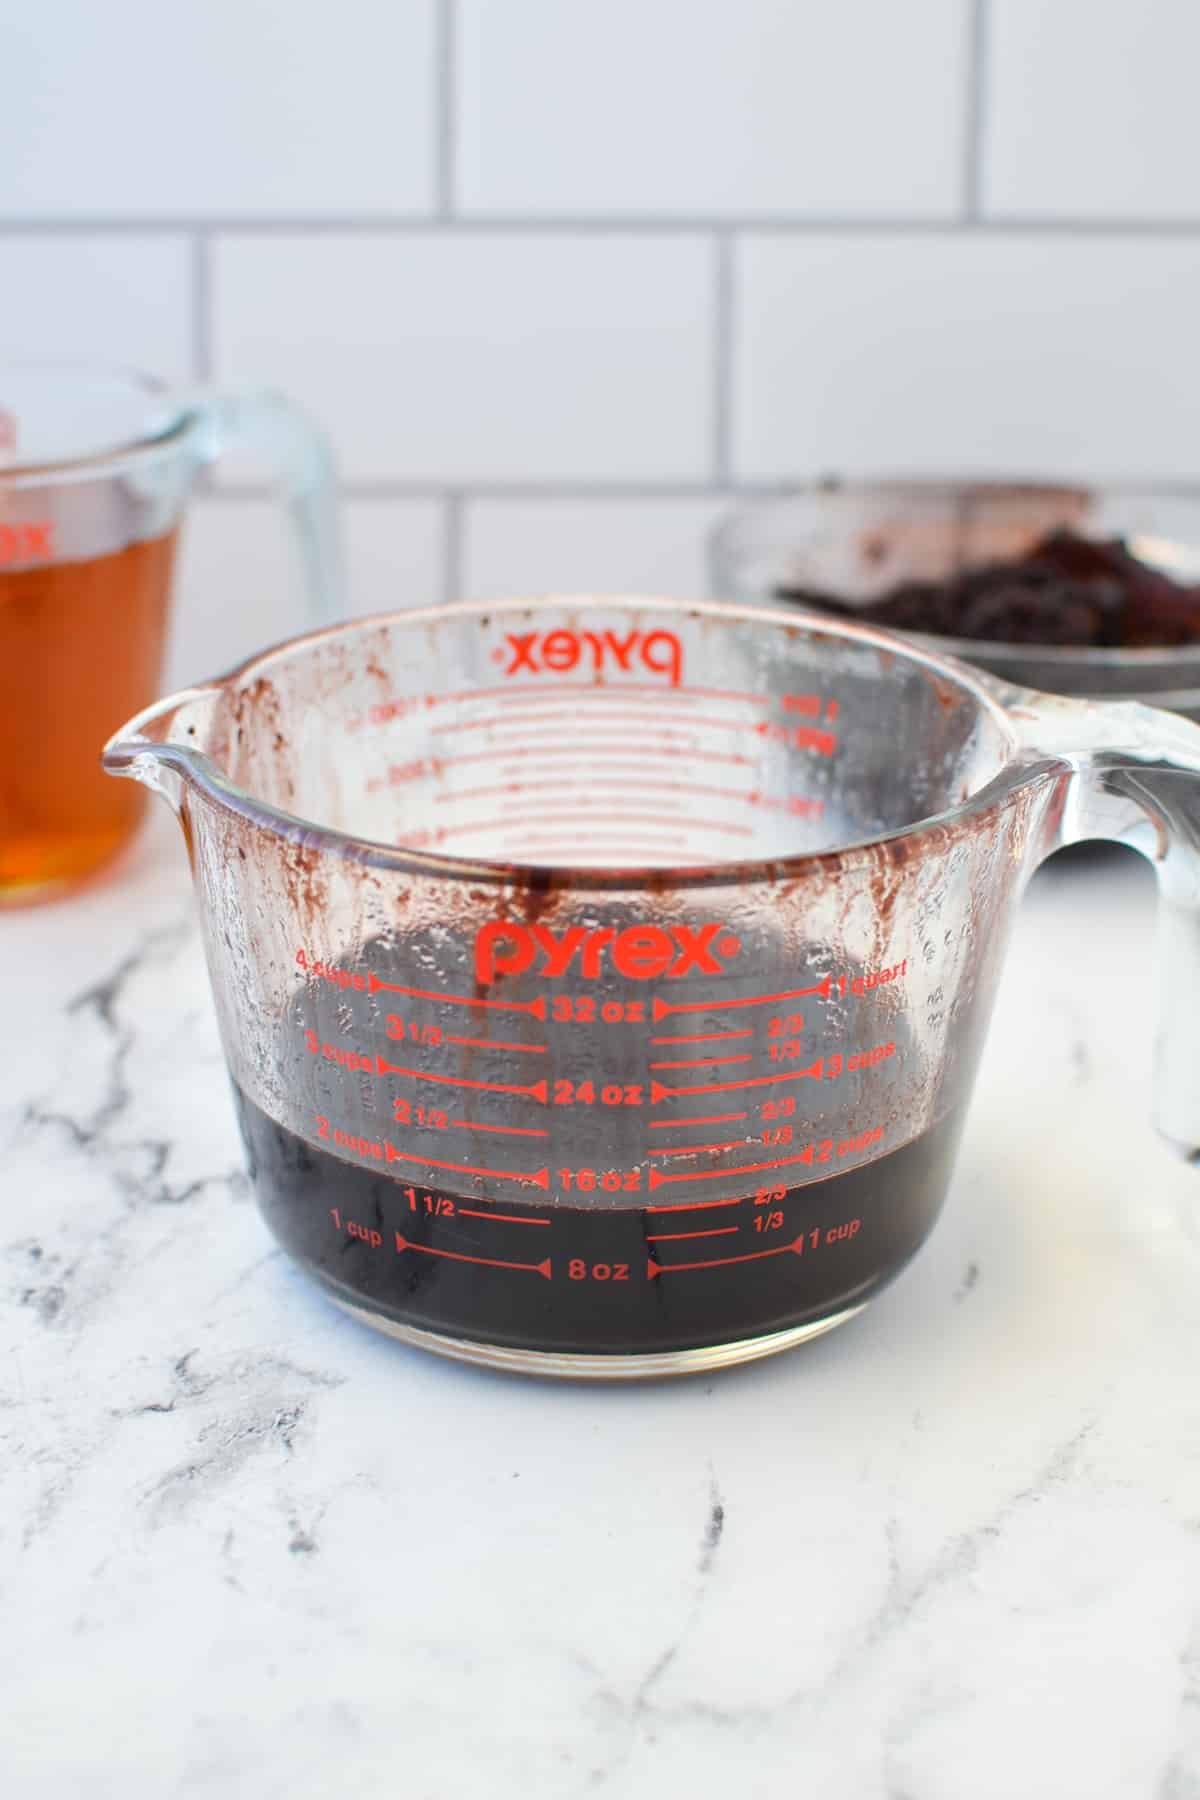 A glass measuring cup filled with liquid.